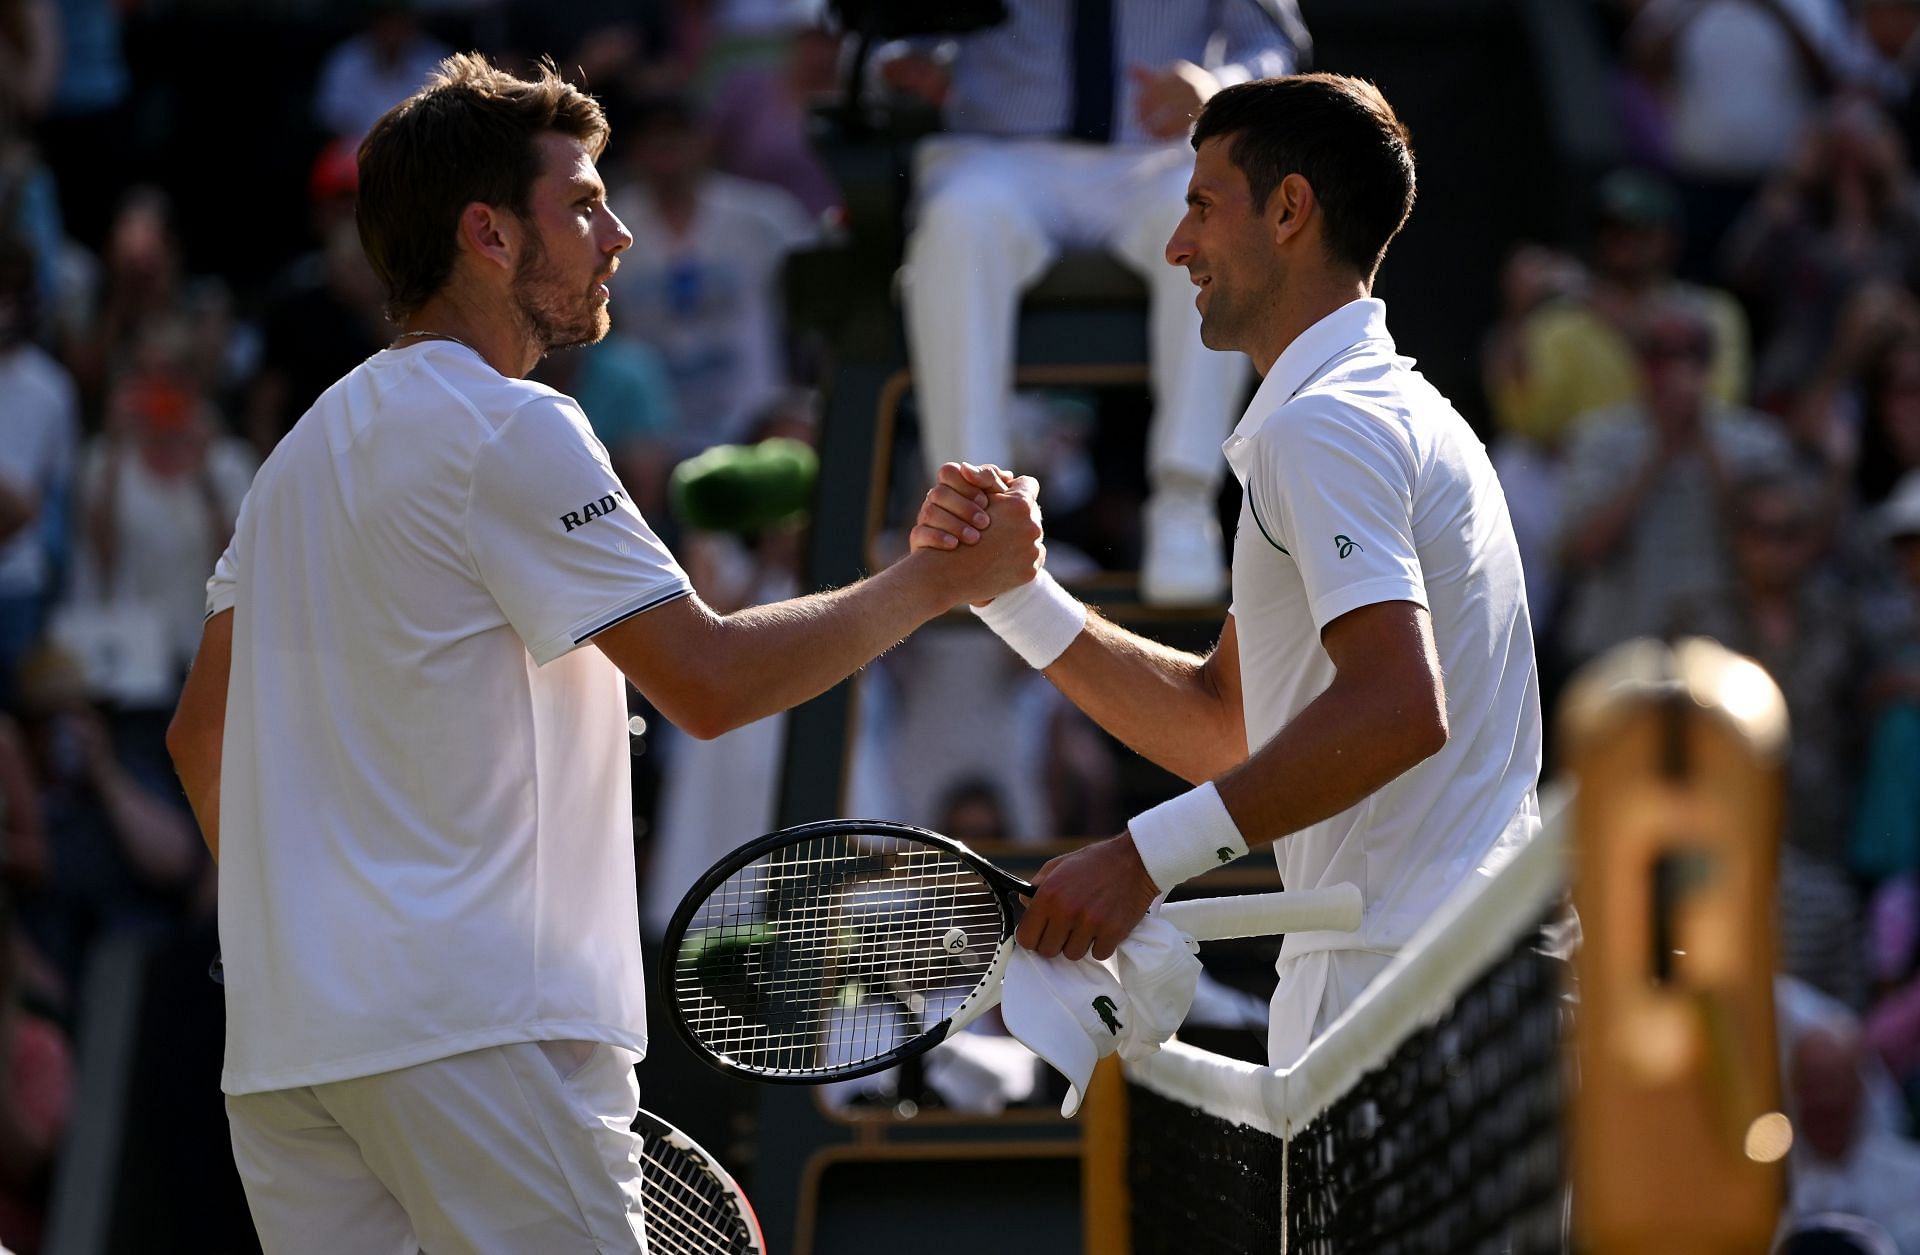 Cameron Norrie (left) shakes the hand of winner Novak Djokovic (right) at the end of their semifinal match at Wimbledon last July.